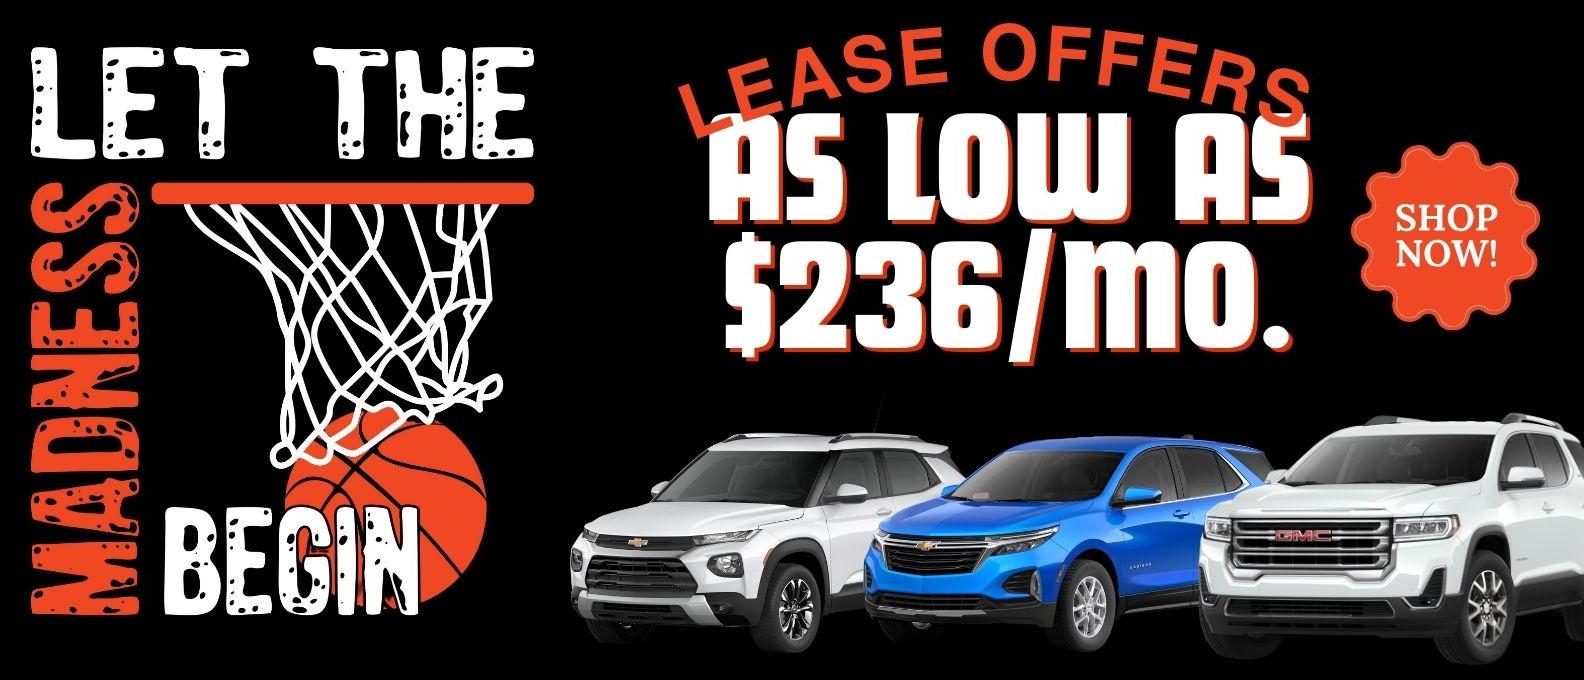 March Lease offers at Jerry's.   Get a lease as low as $236 per month